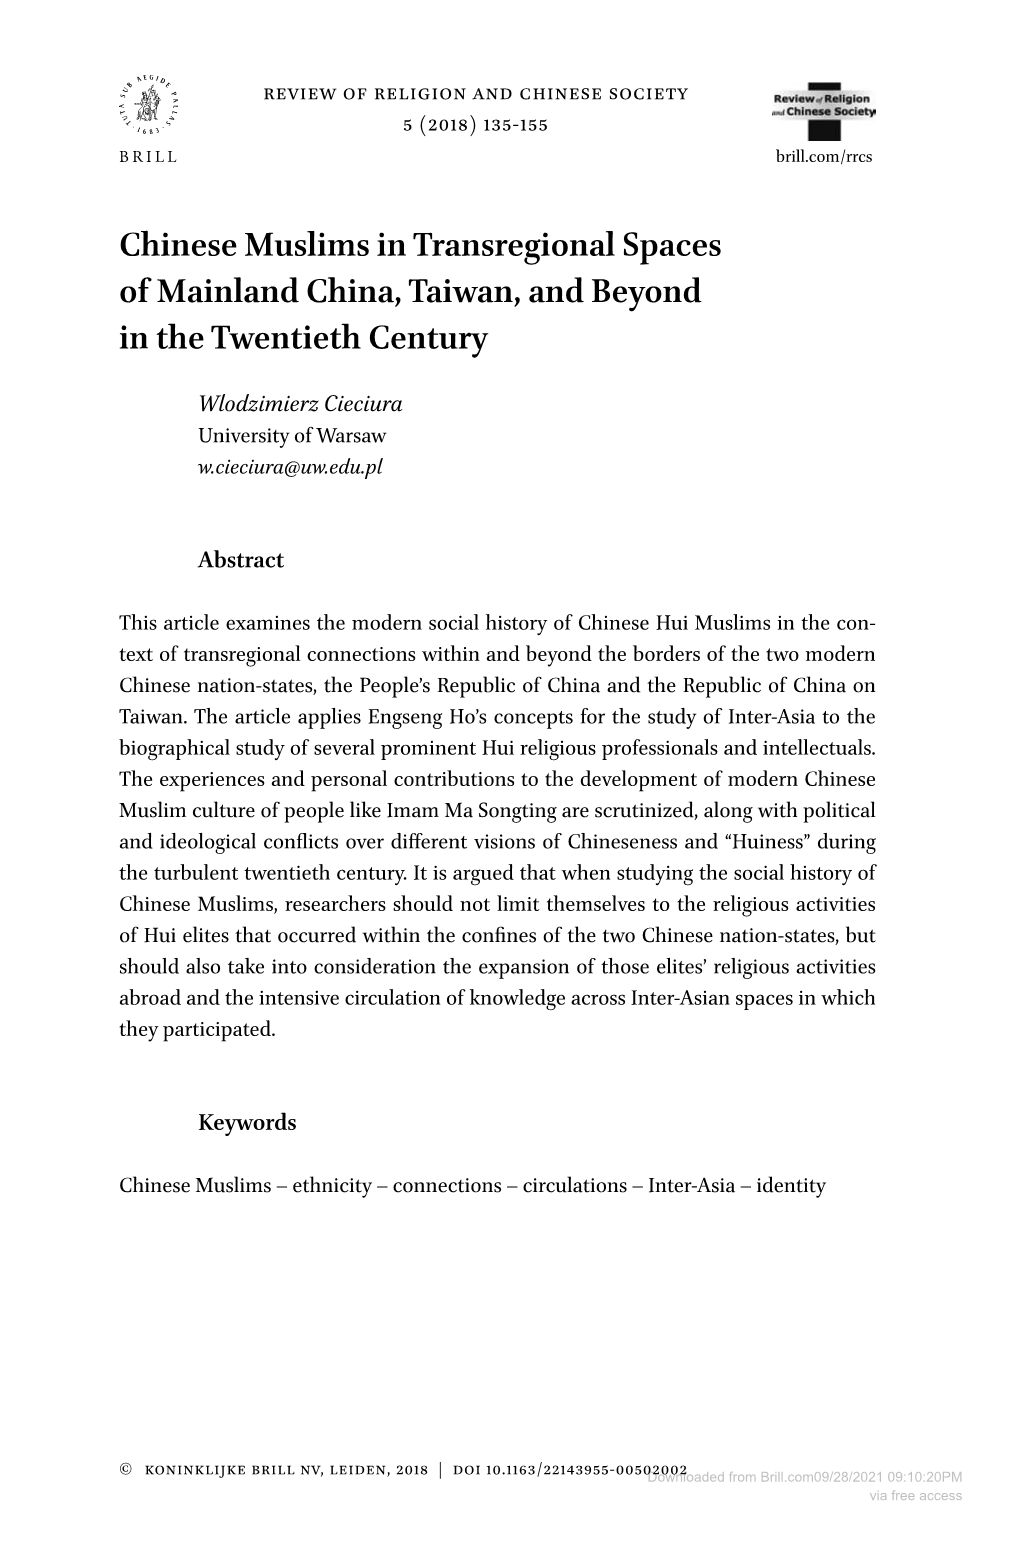 Chinese Muslims in Transregional Spaces of Mainland China, Taiwan, and Beyond in the Twentieth Century